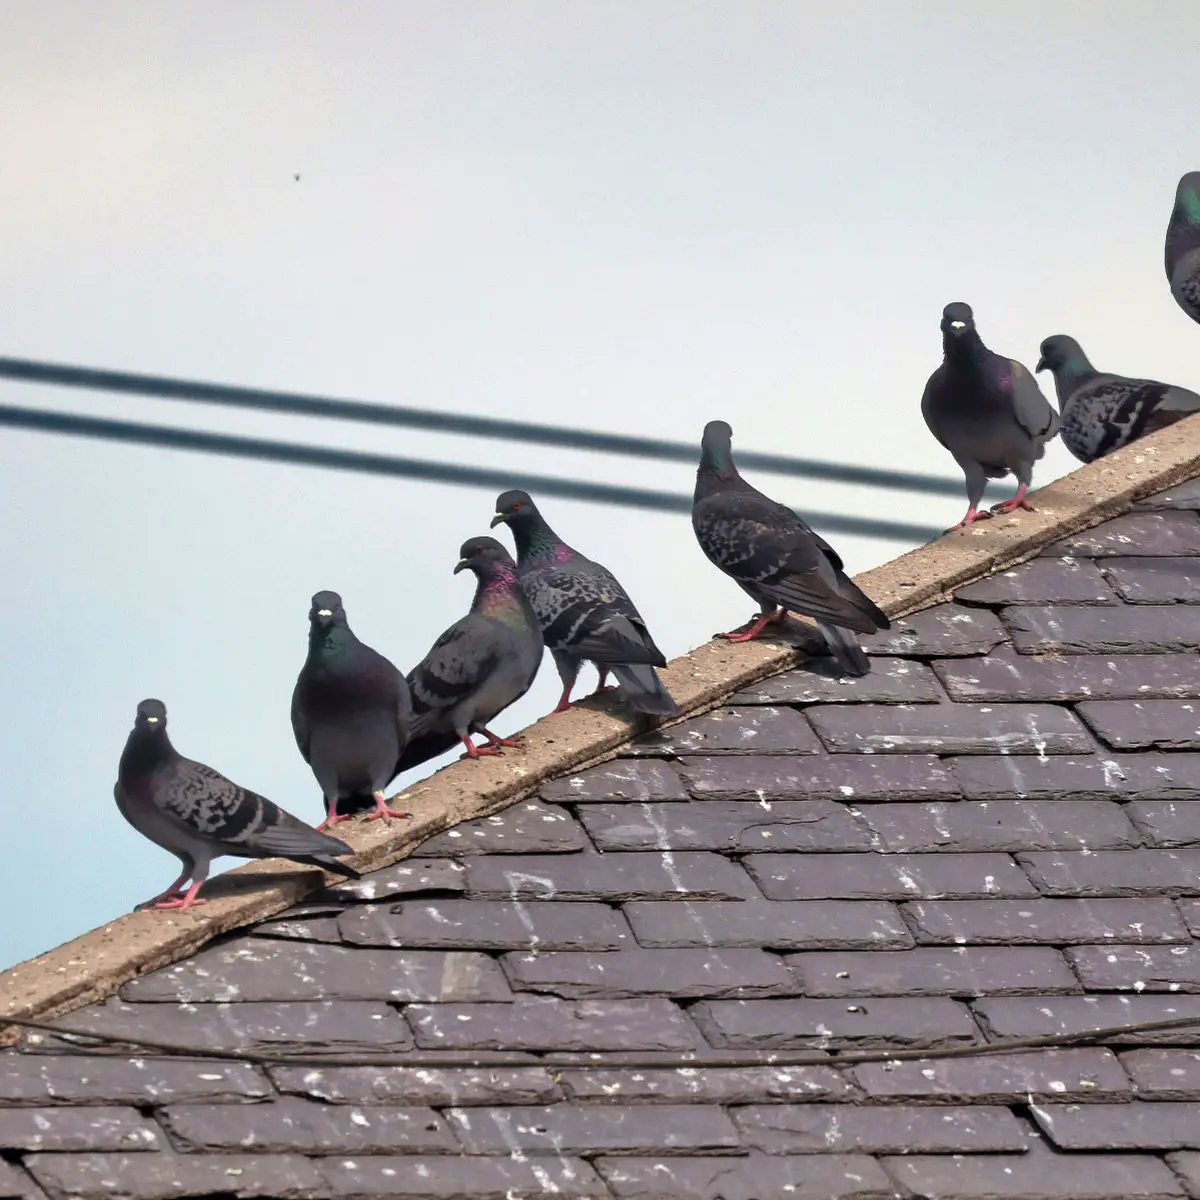 How To Get Rid Of Pigeons On Roof Uk / Pigeon Proofing Solar Panels ...